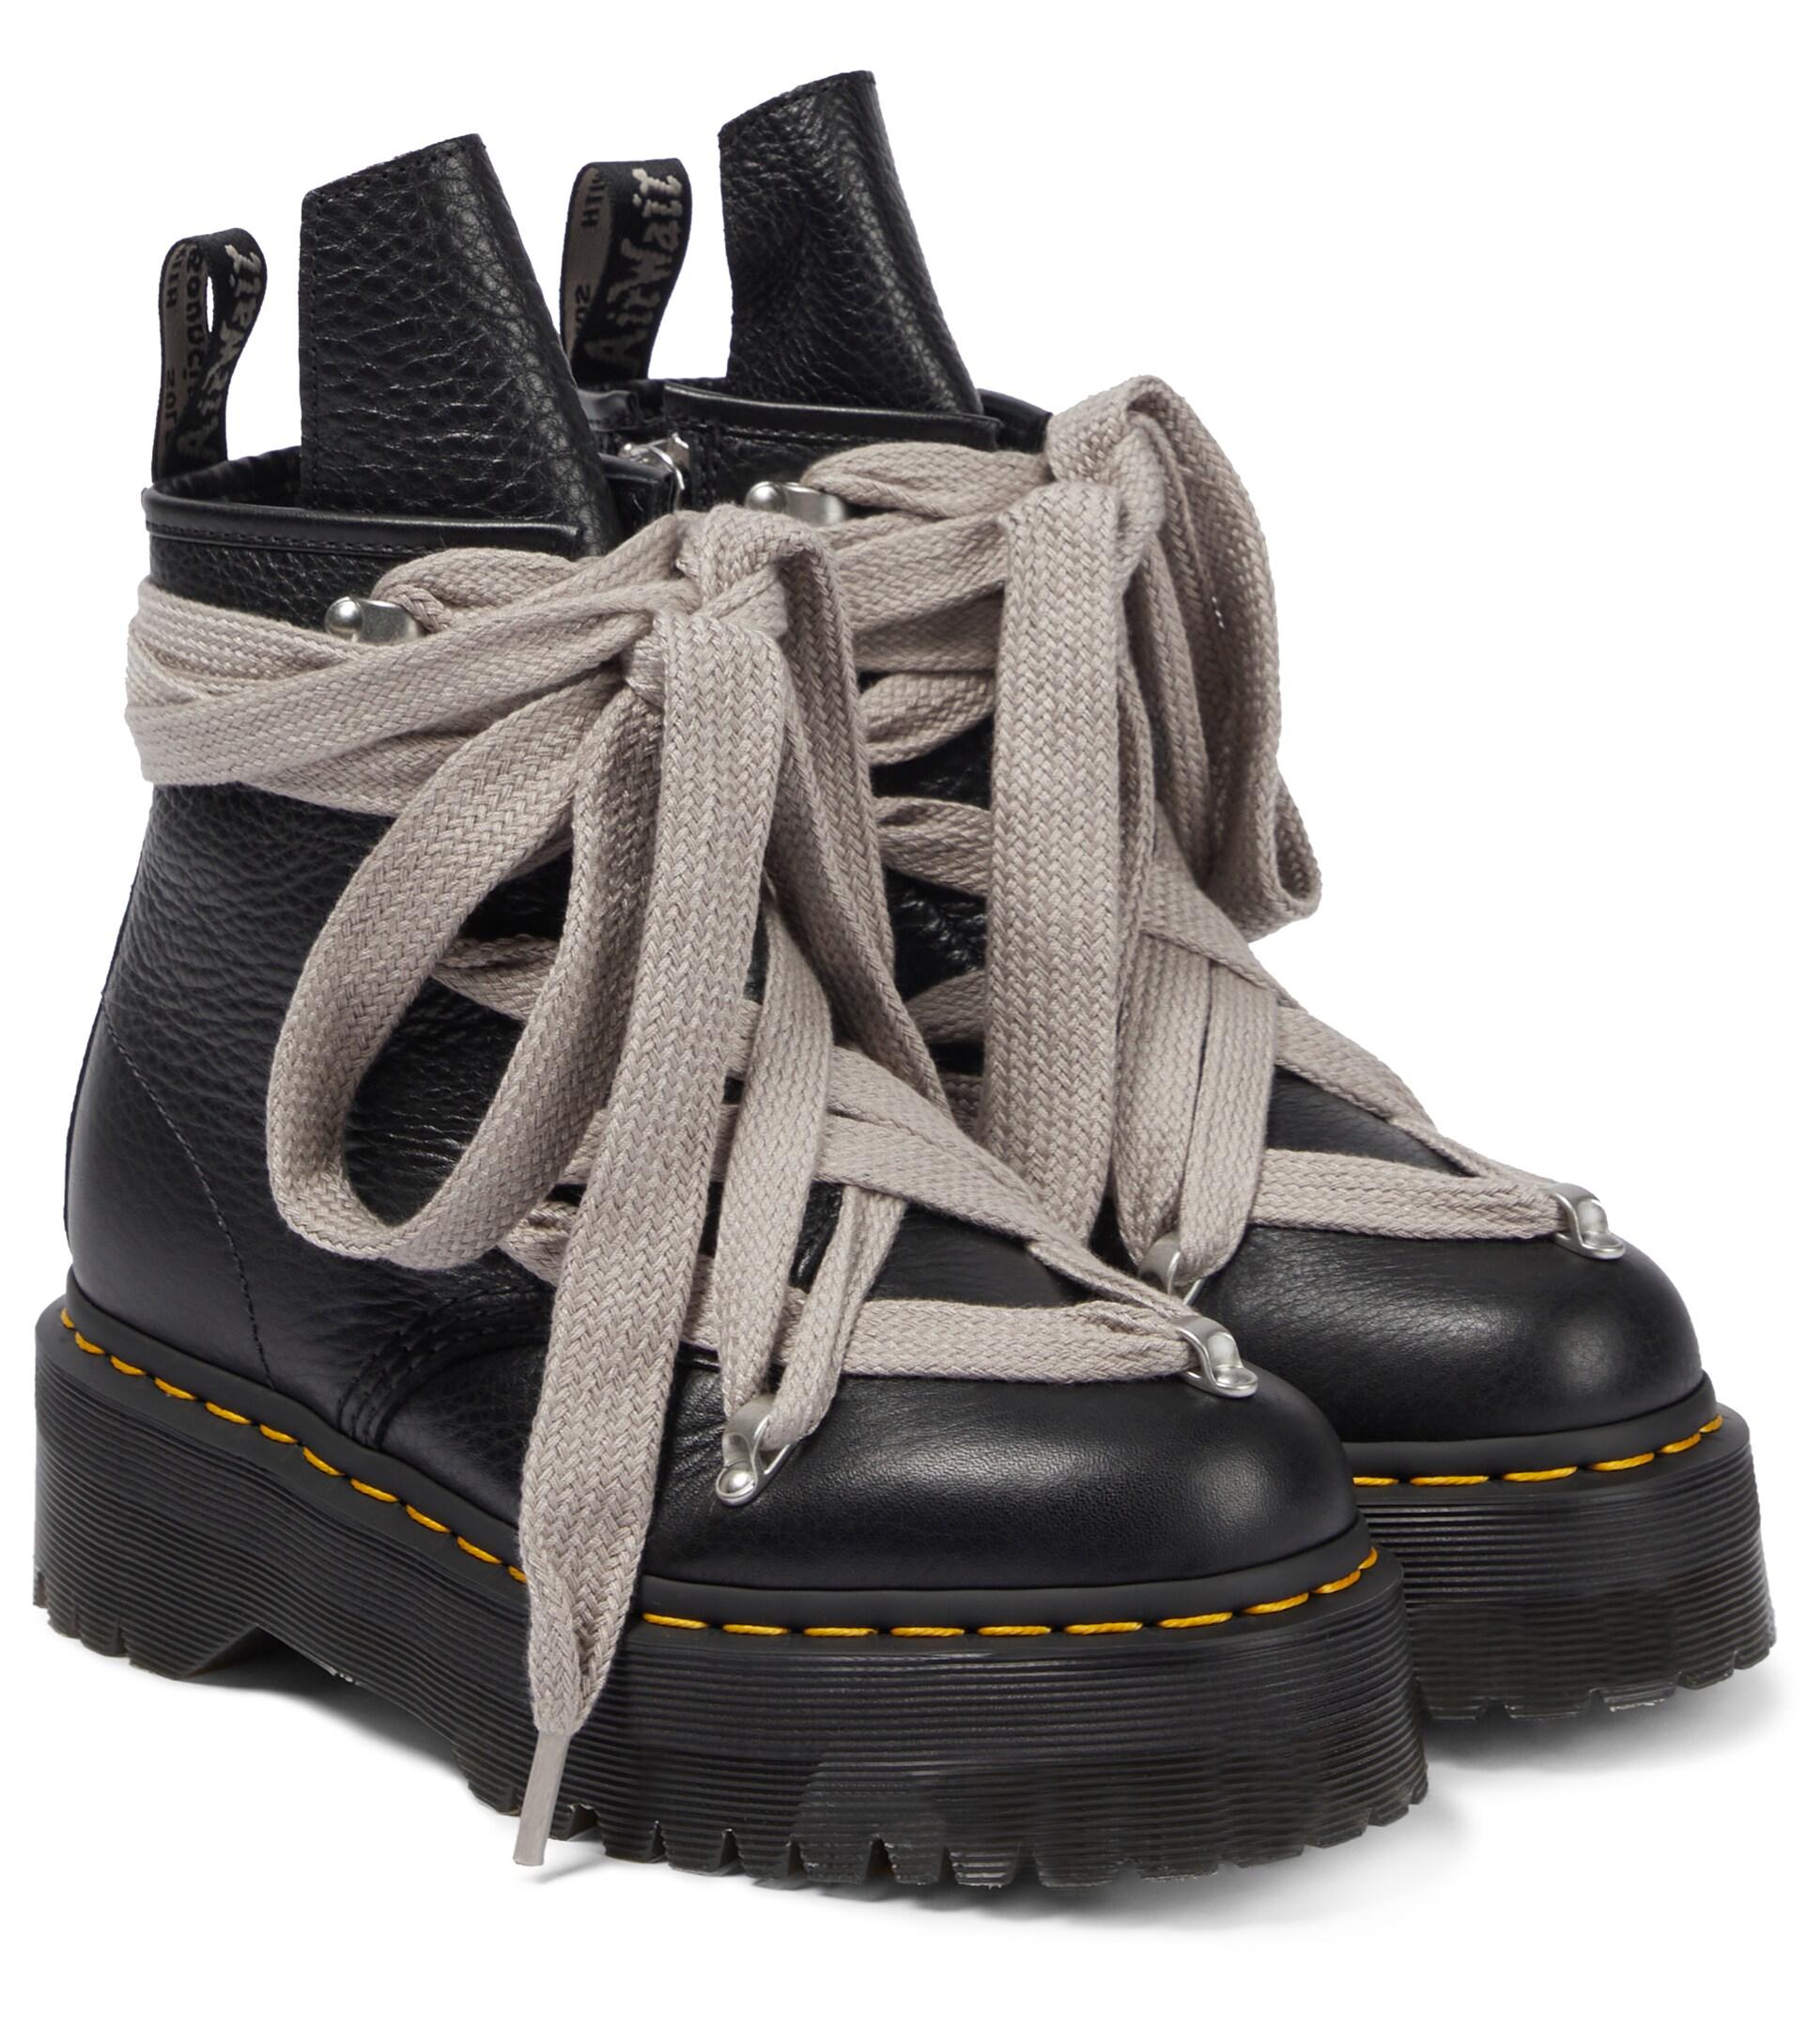 Rick Owens X Dr. Martens Leather Boots in Black | Lyst